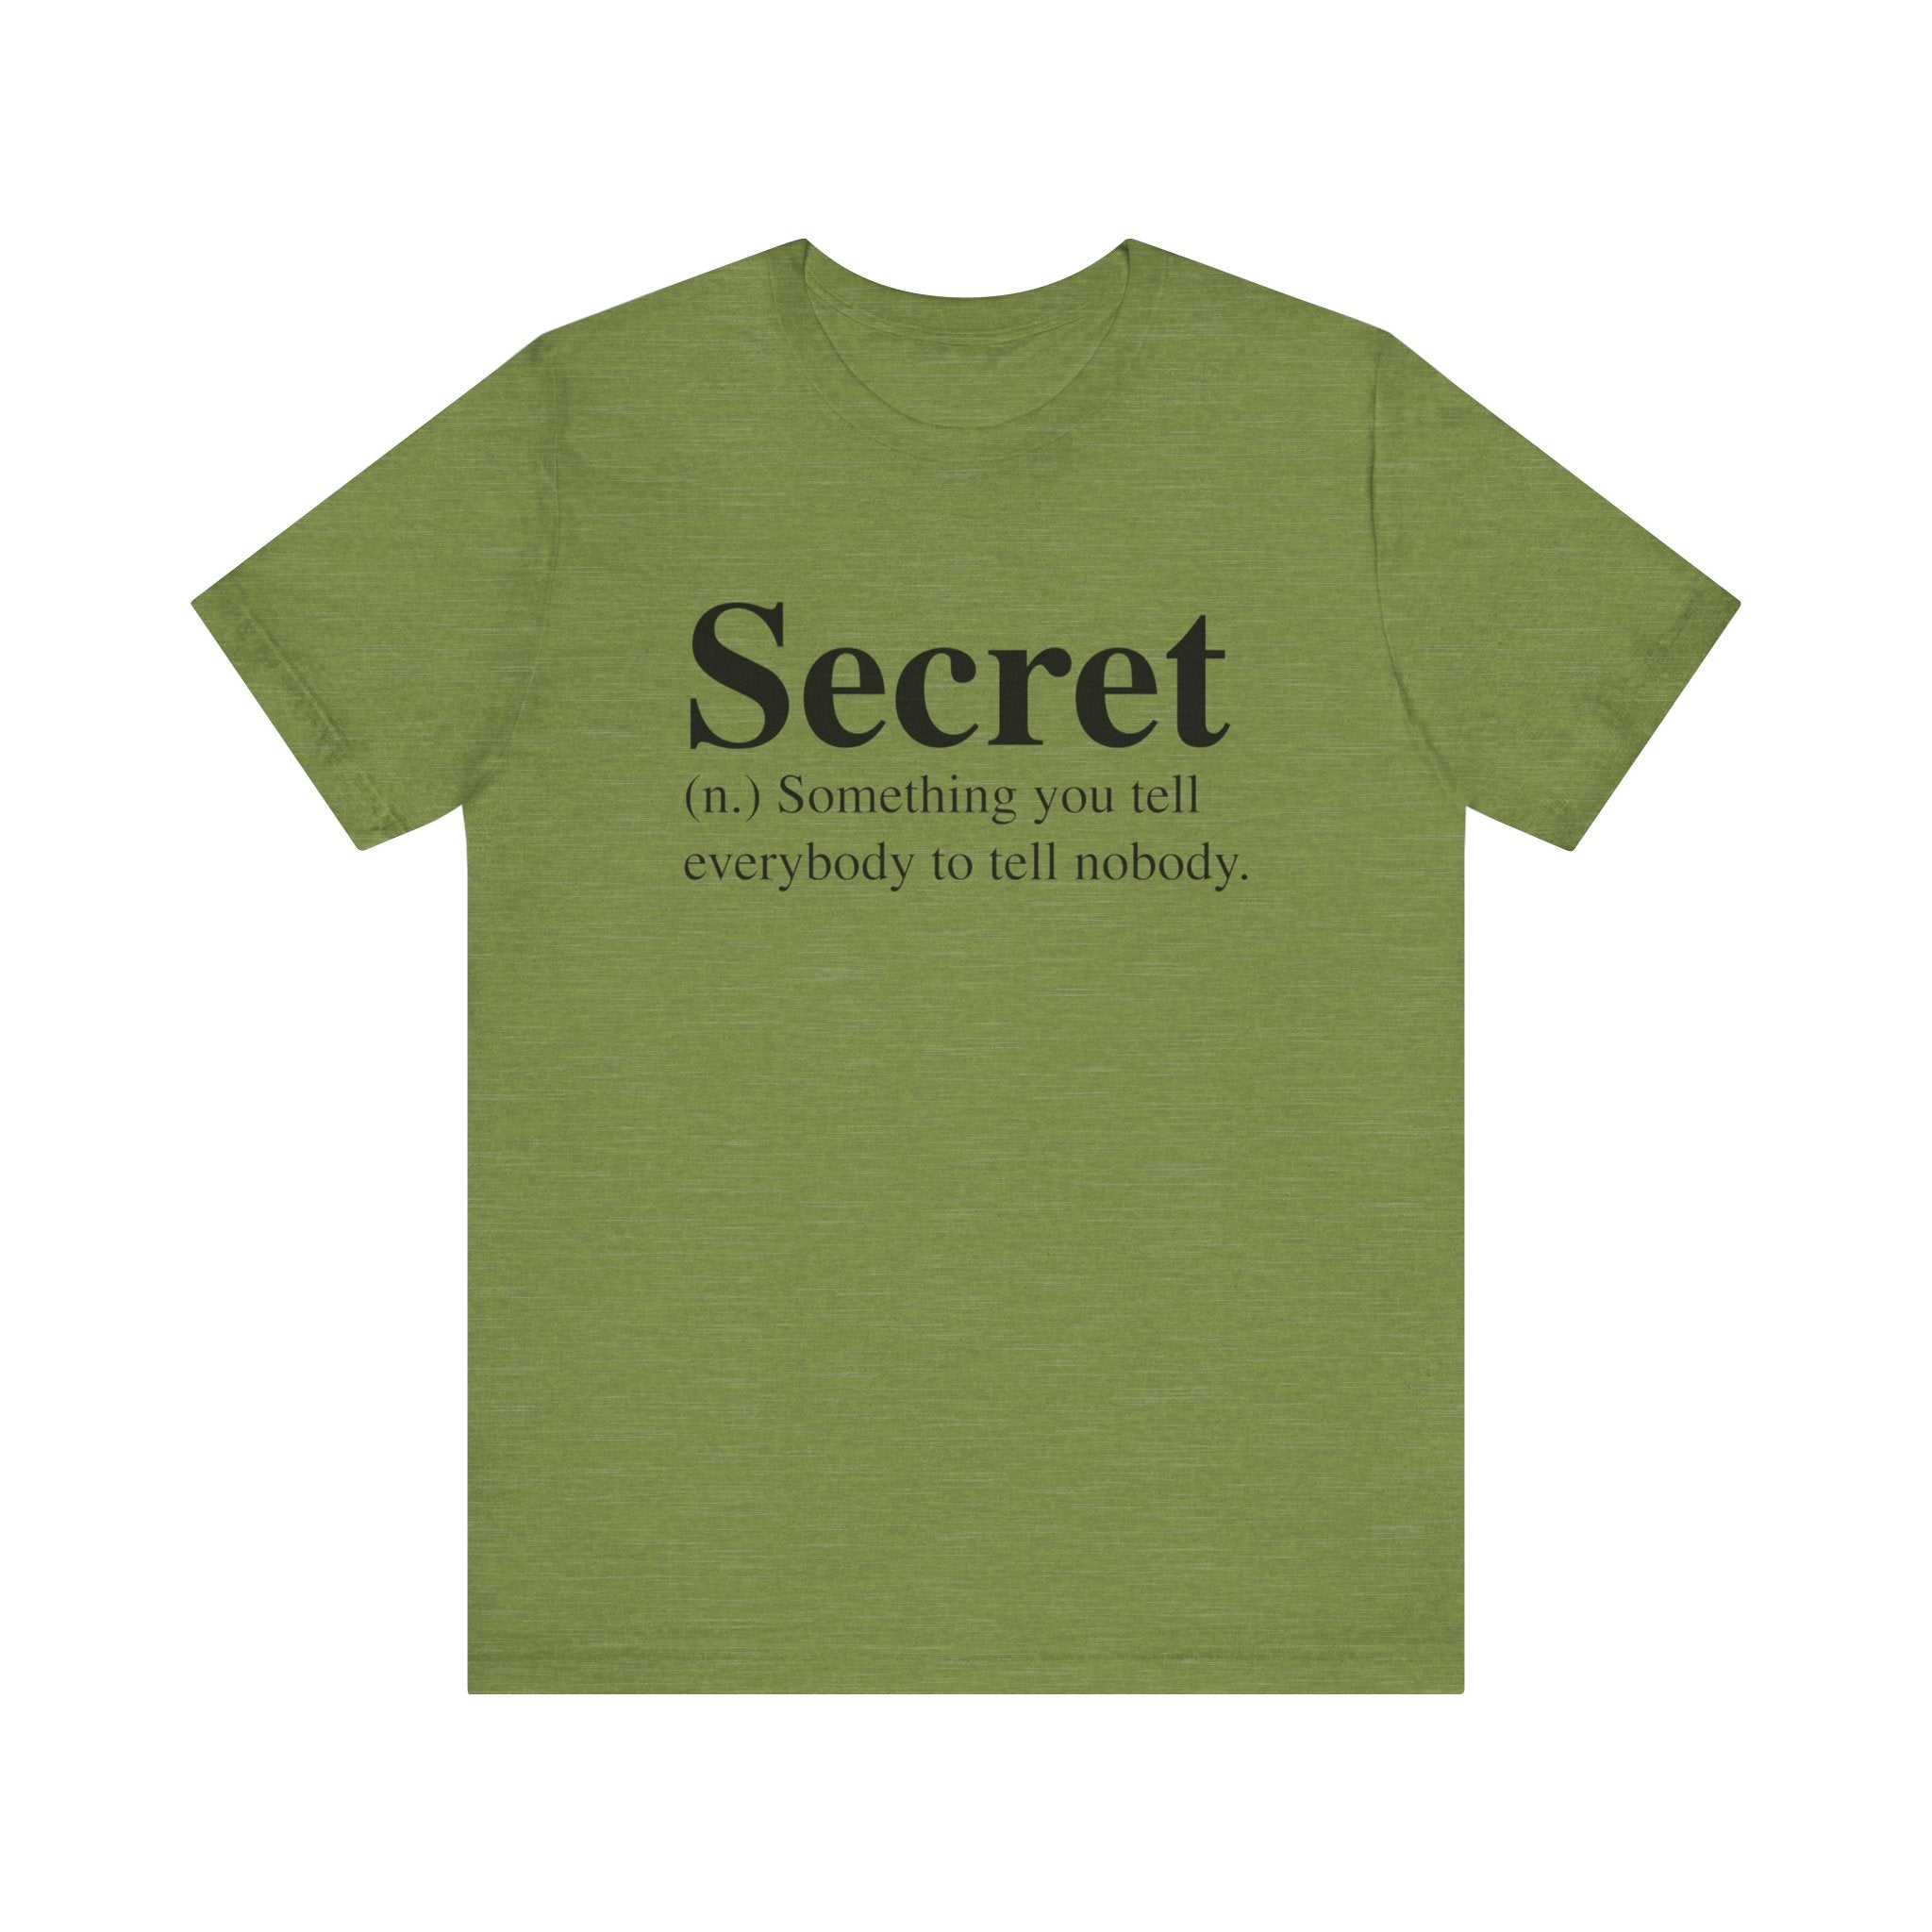 Green unisex Secret T-Shirt with the word "secret" and its definition printed in quality black text on the front.